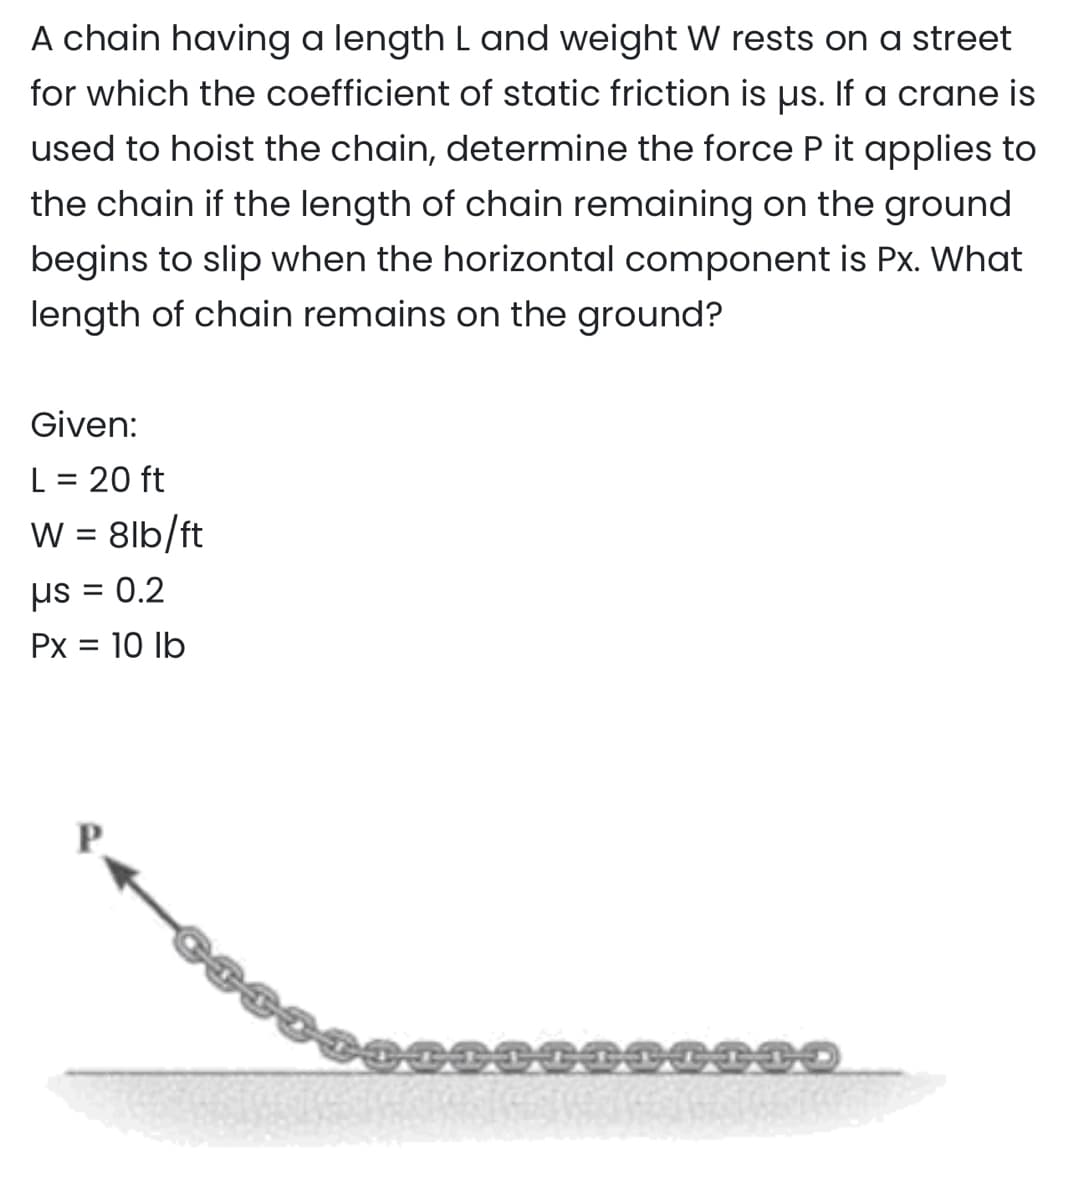 A chain having a length L and weight W rests on a street
for which the coefficient of static friction is us. If a crane is
used to hoist the chain, determine the force P it applies to
the chain if the length of chain remaining on the ground
begins to slip when the horizontal component is Px. What
length of chain remains on the ground?
Given:
L = 20 ft
W = 8lb/ft
= 0.2
us=
: 10 lb
Px =